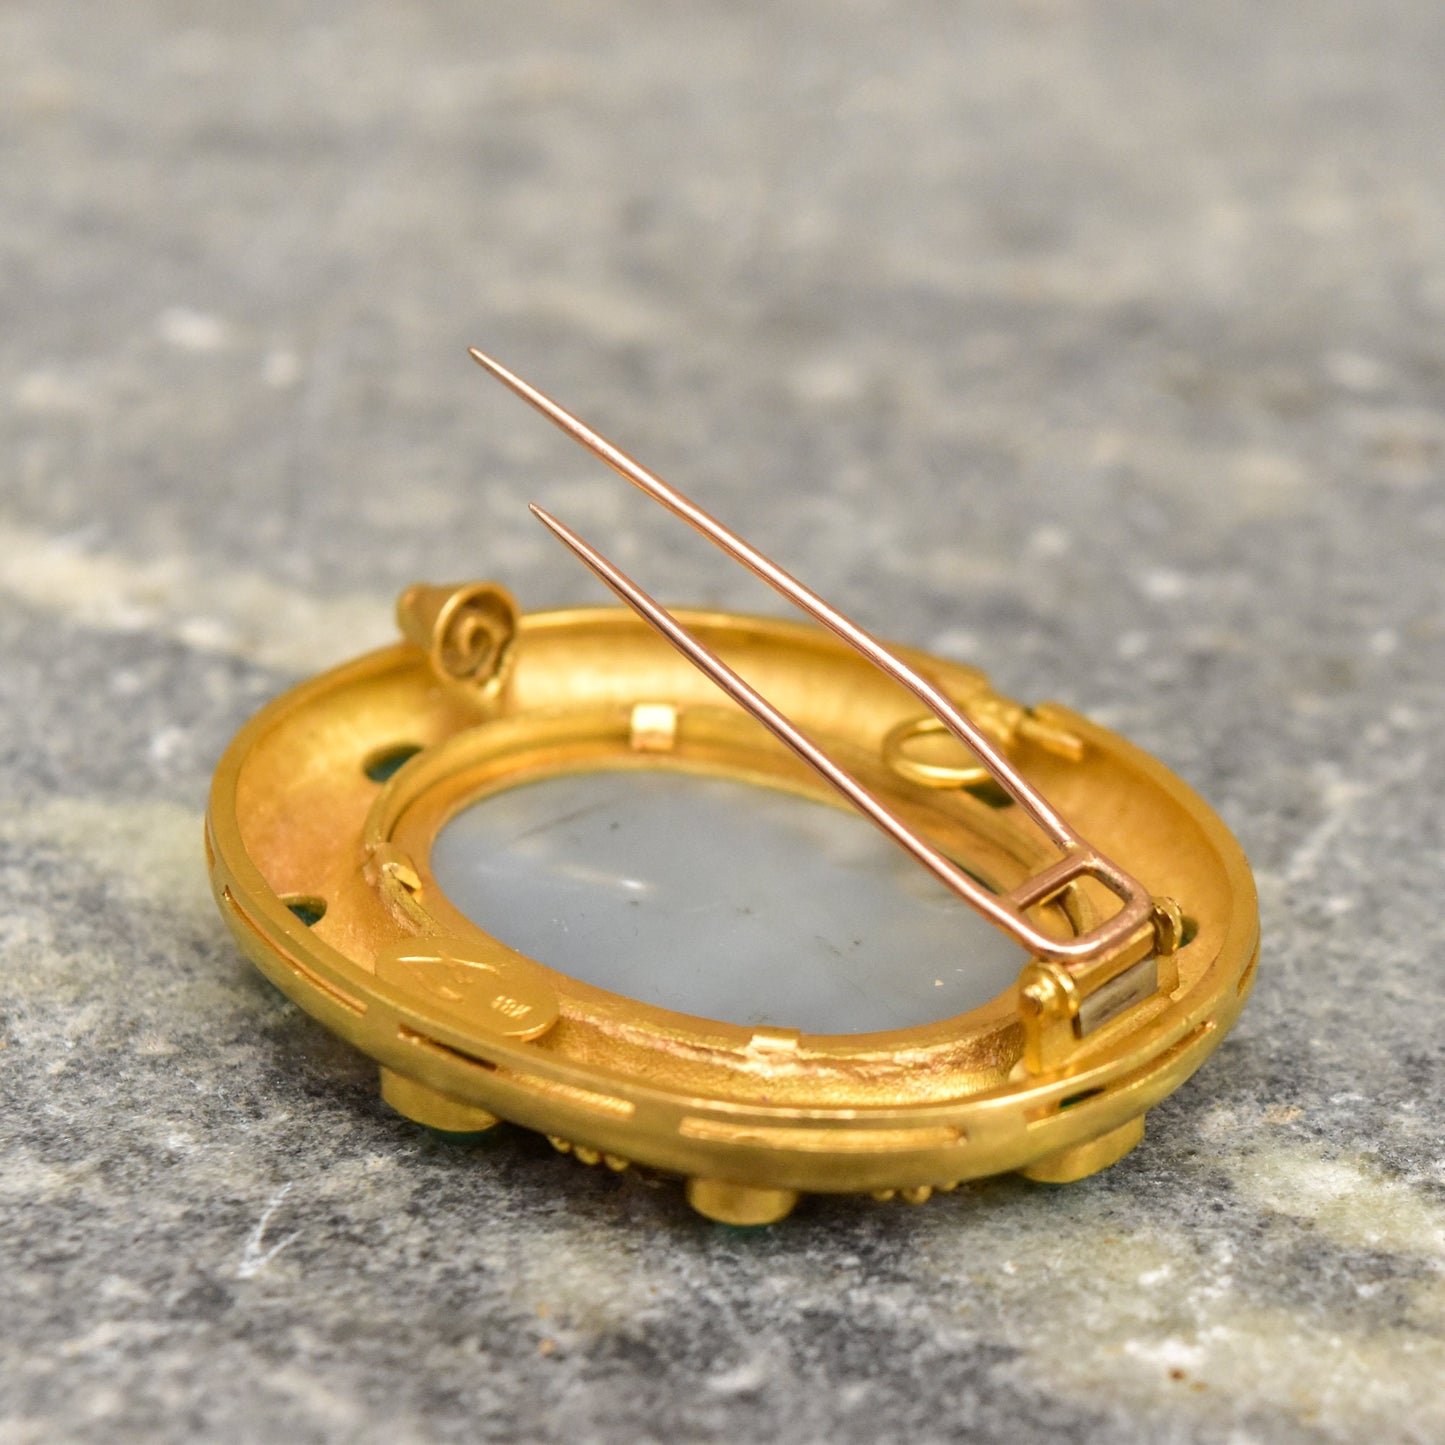 18K gold brooch pendant with oval Venetian glass intaglio, three gold prongs securing the glass, and mother of pearl backing, displayed on gray textured surface.